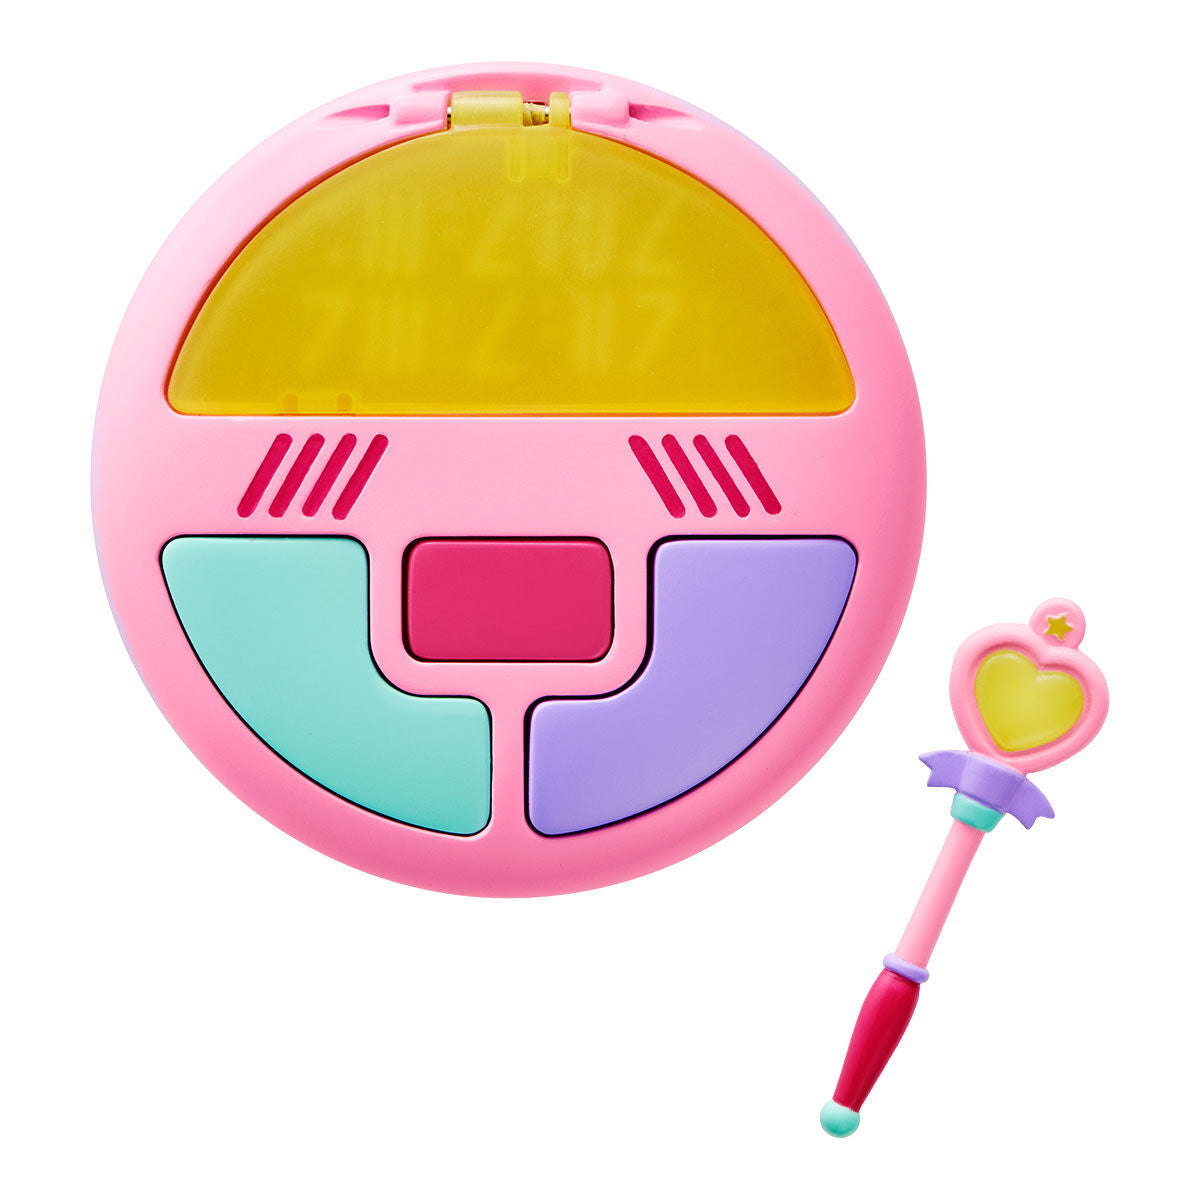 Magical Angel Creamy Mami Special Memorize Magical Compact